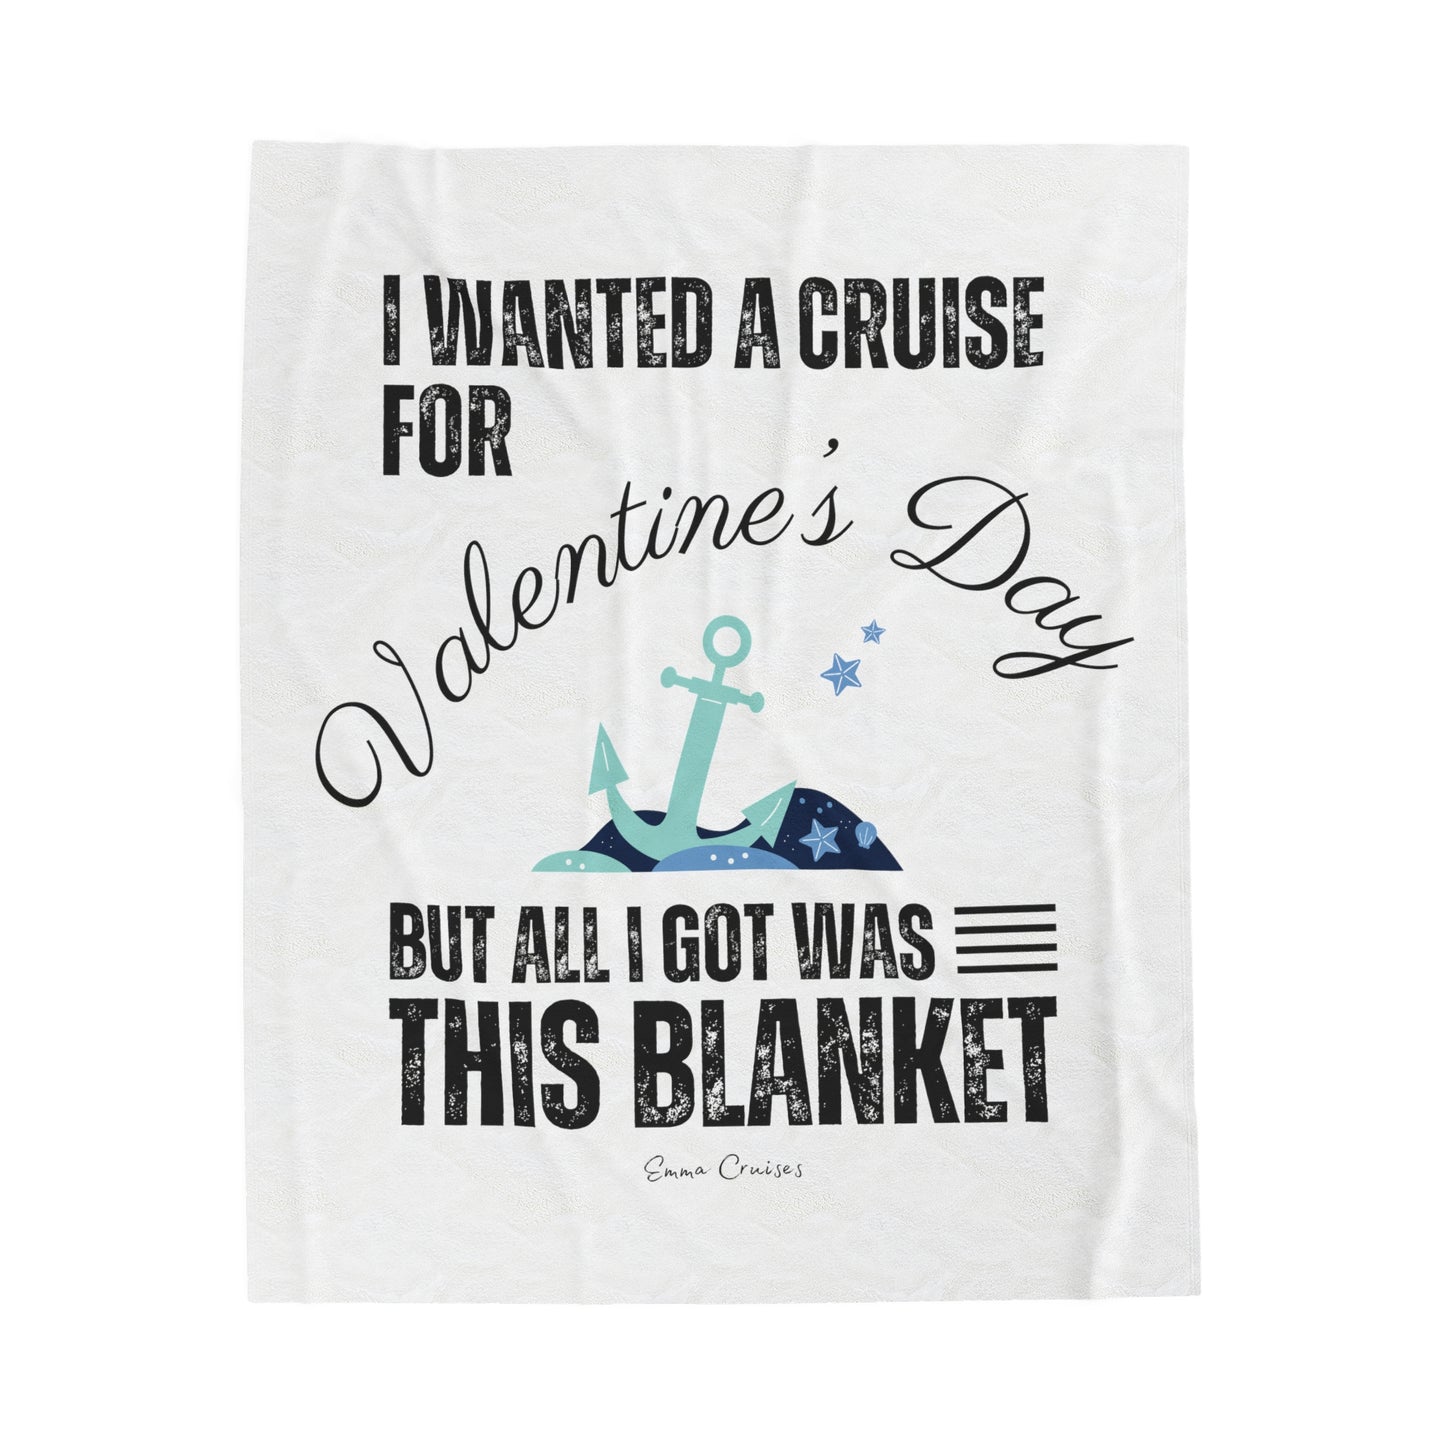 I Wanted a Cruise for Valentine's Day - Velveteen Plush Blanket